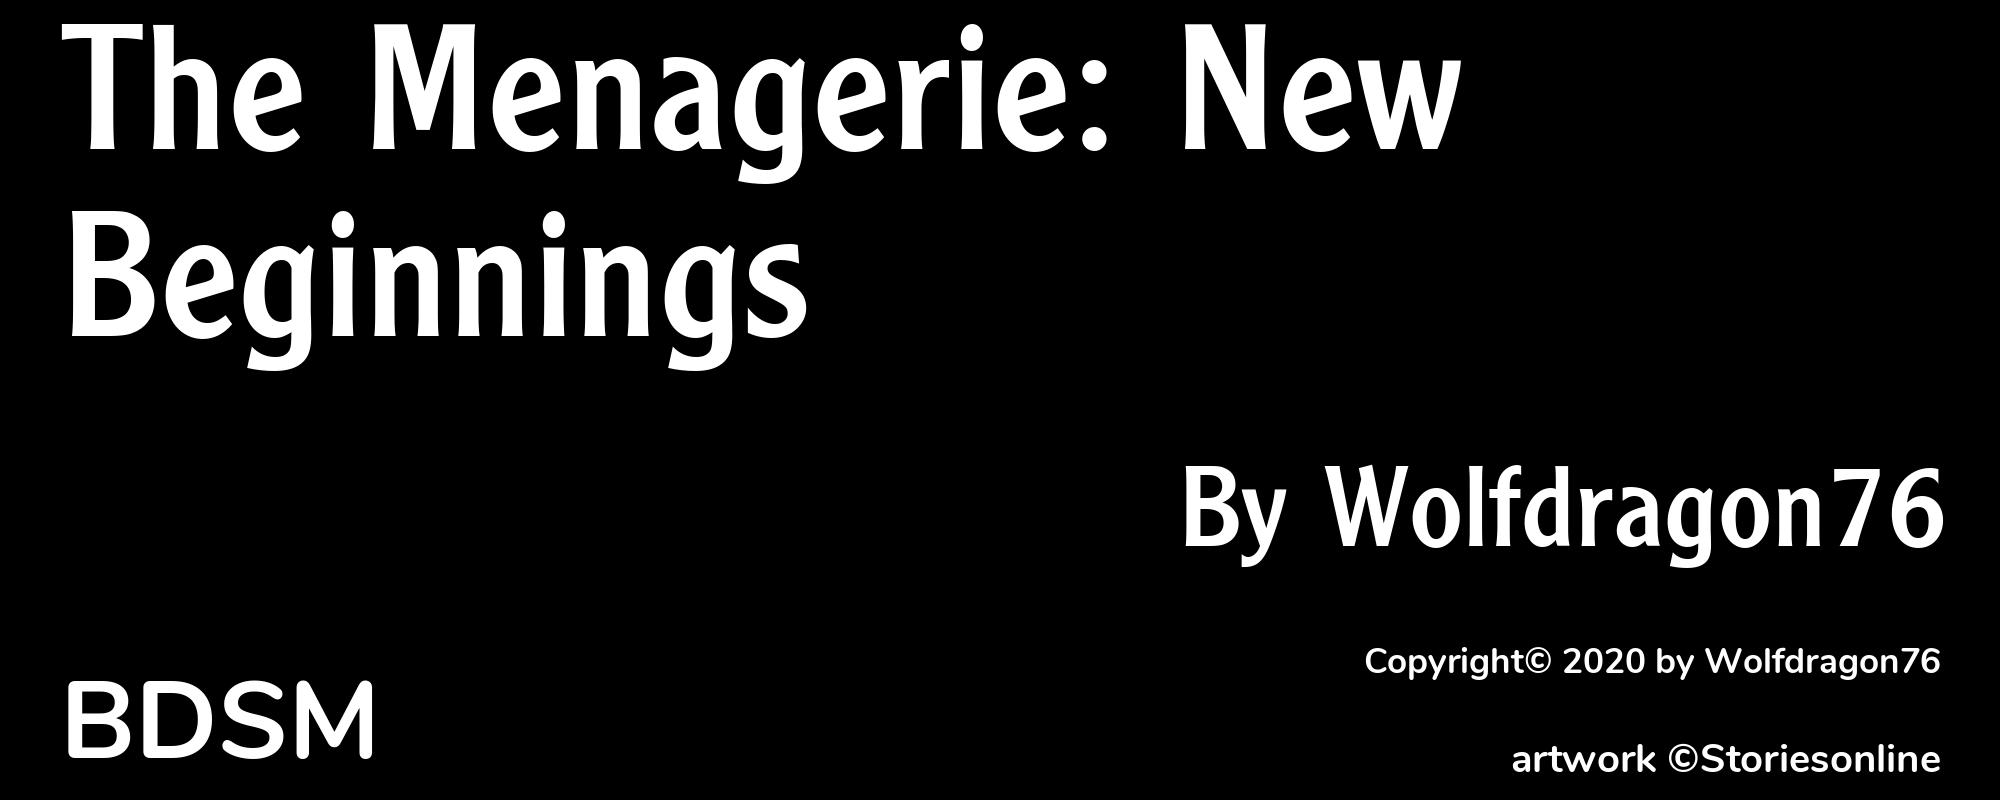 The Menagerie: New Beginnings - Cover